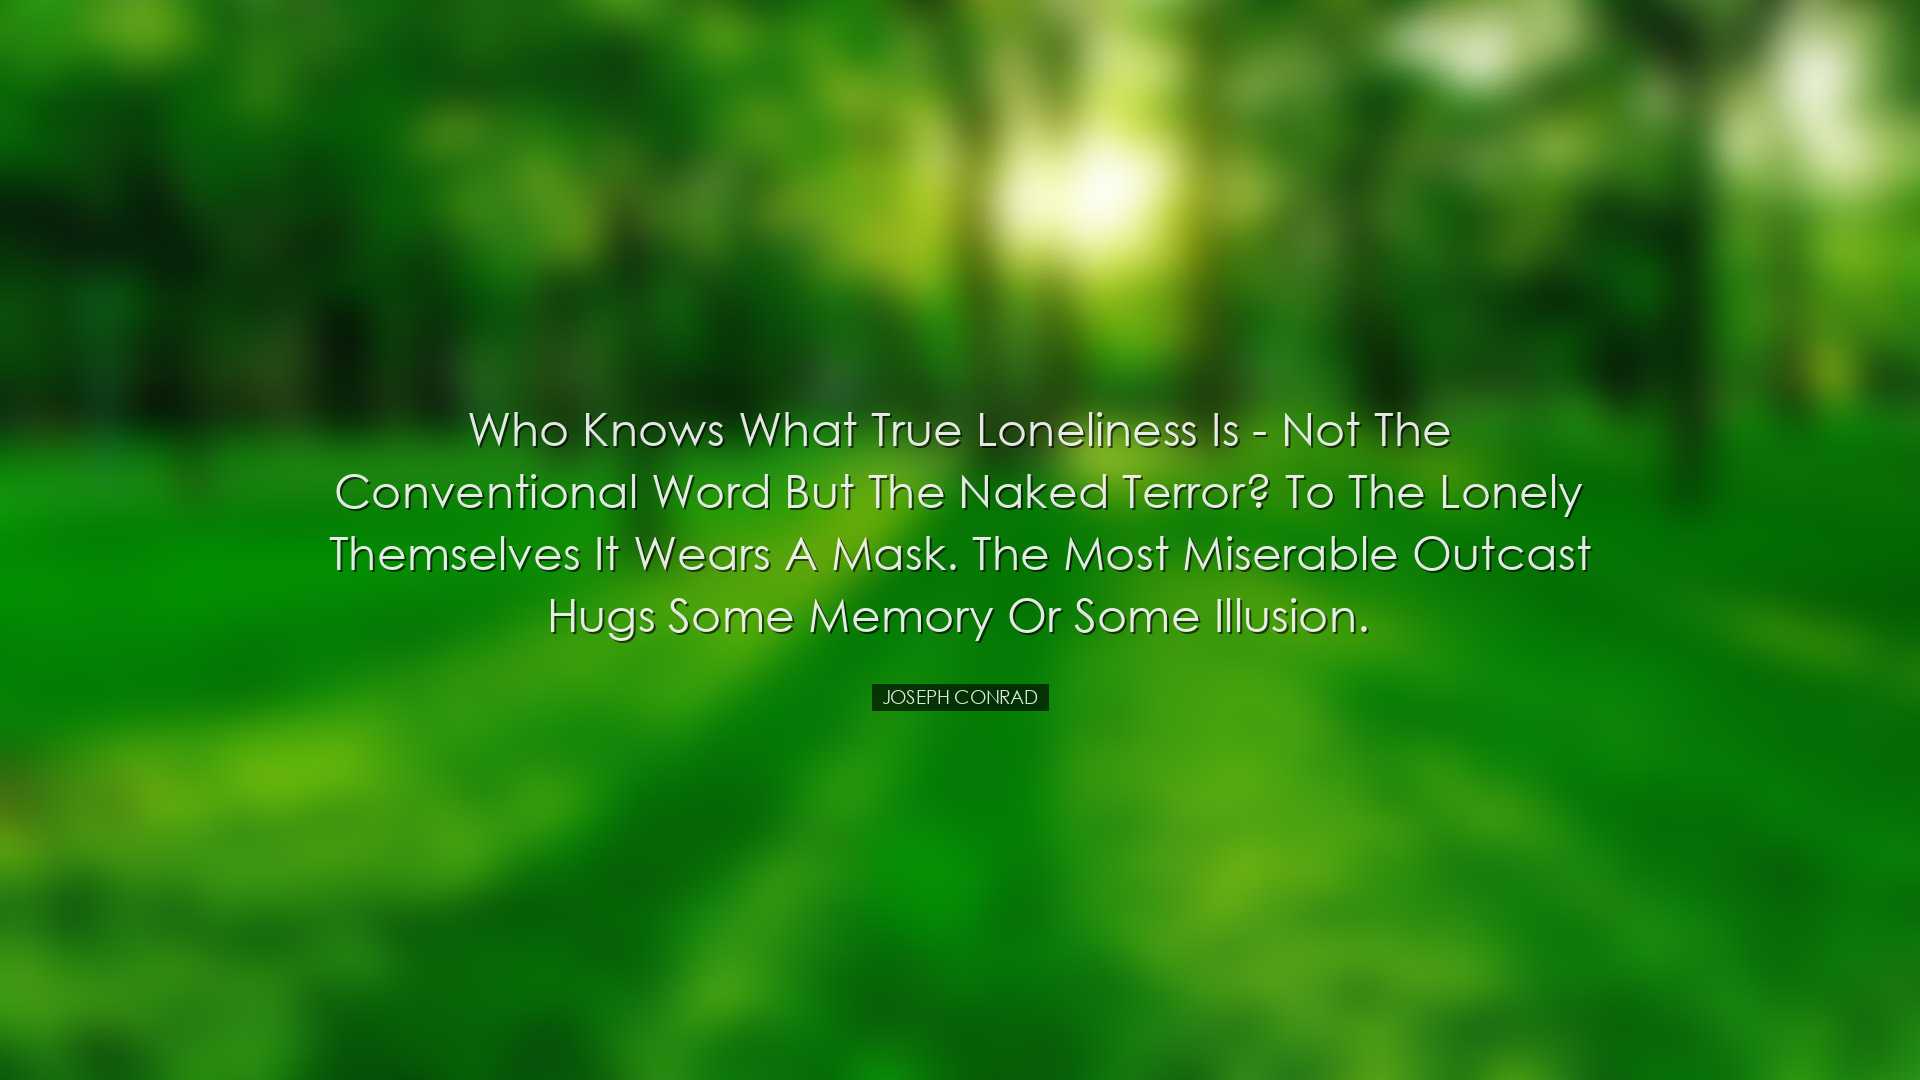 Who knows what true loneliness is - not the conventional word but